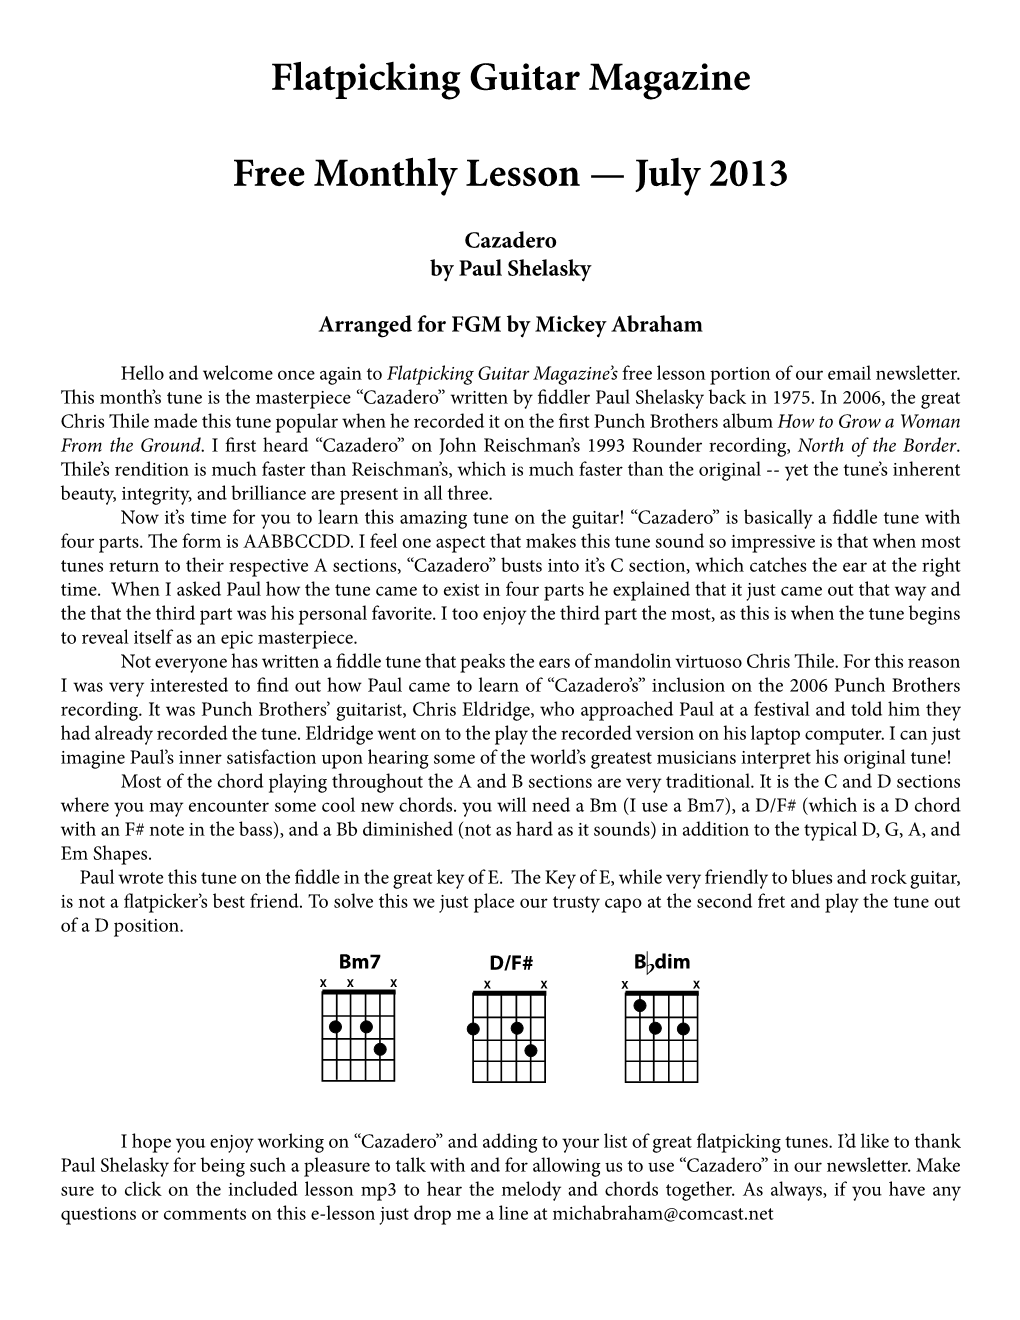 Flatpicking Guitar Magazine Free Monthly Lesson — July 2013